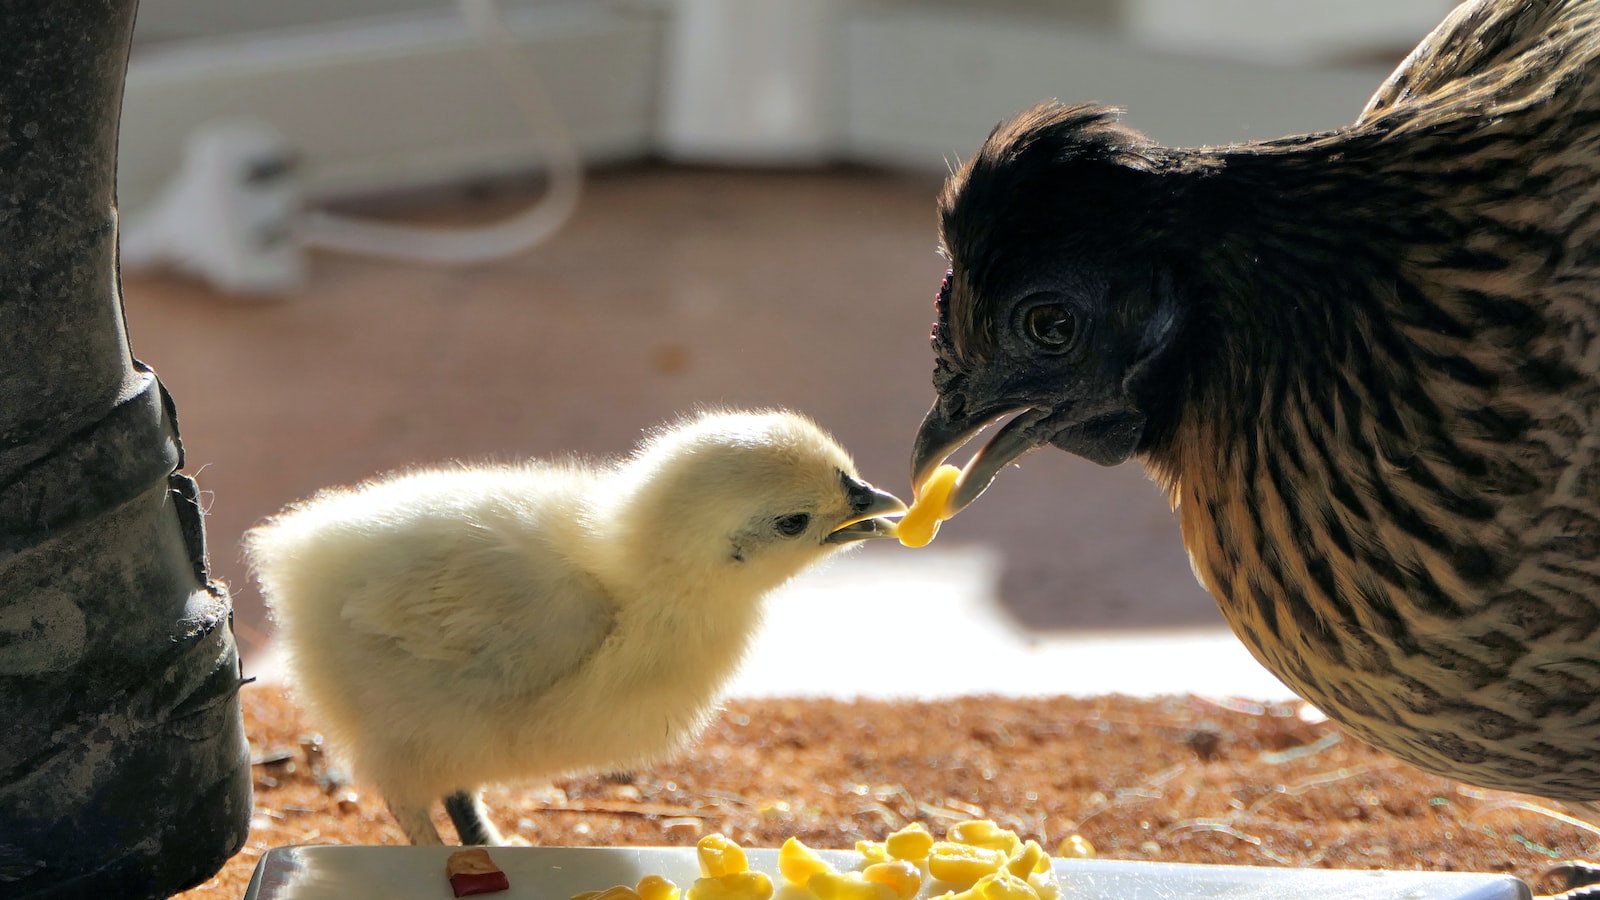 Medicated Feed for Baby Chicks: Is It Necessary?